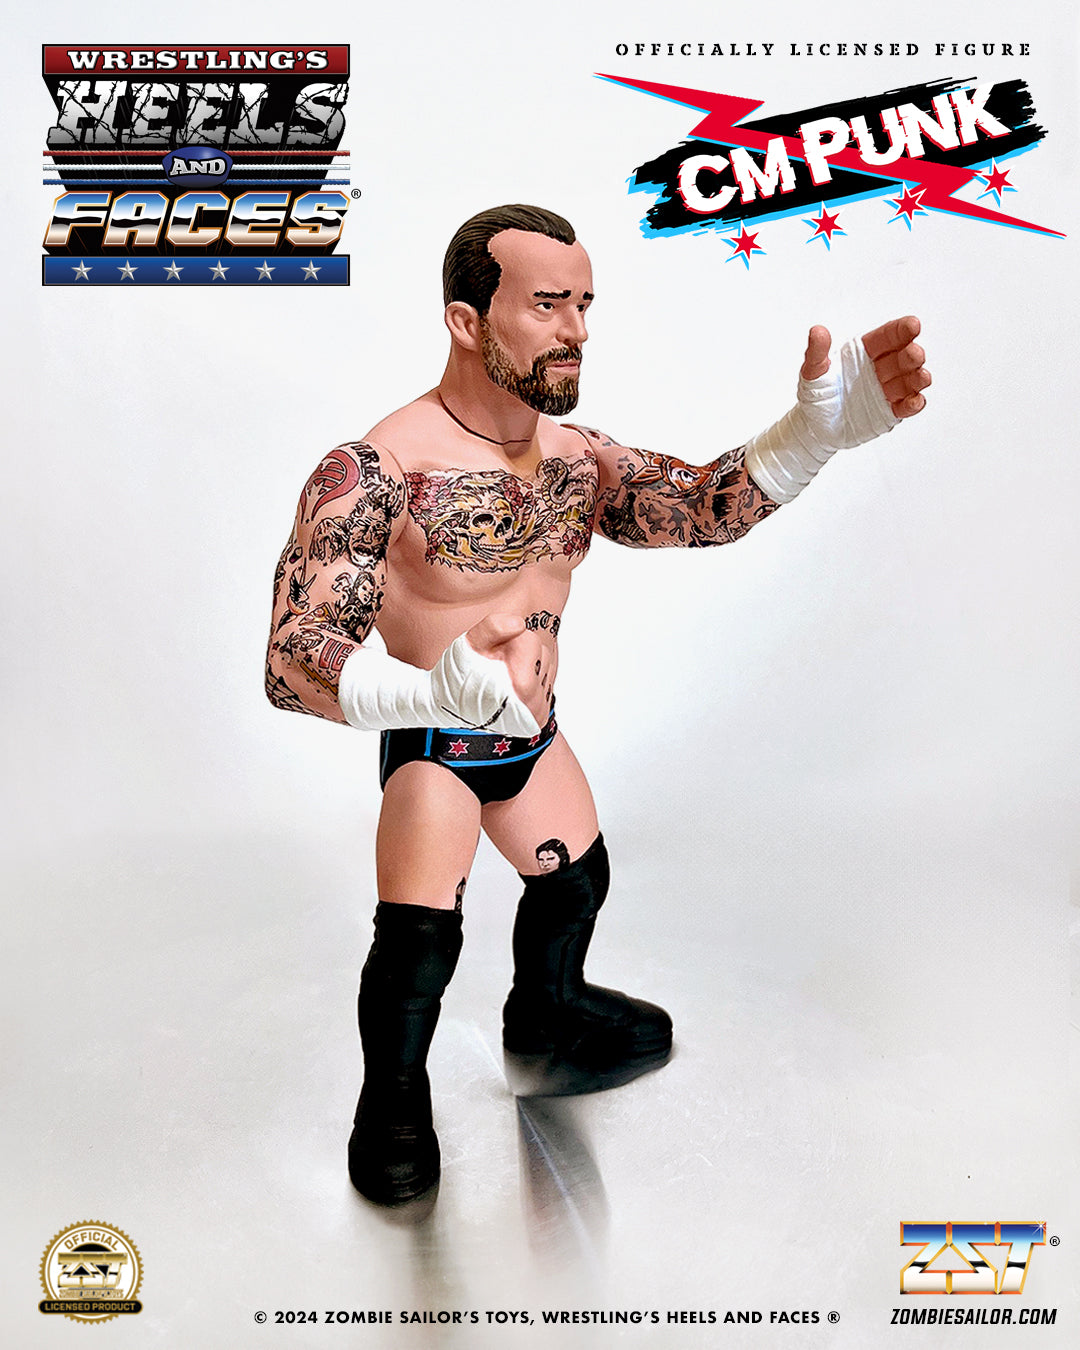 2024 Zombie Sailor's Toys Wrestling's Heels & Faces CM Punk [With 